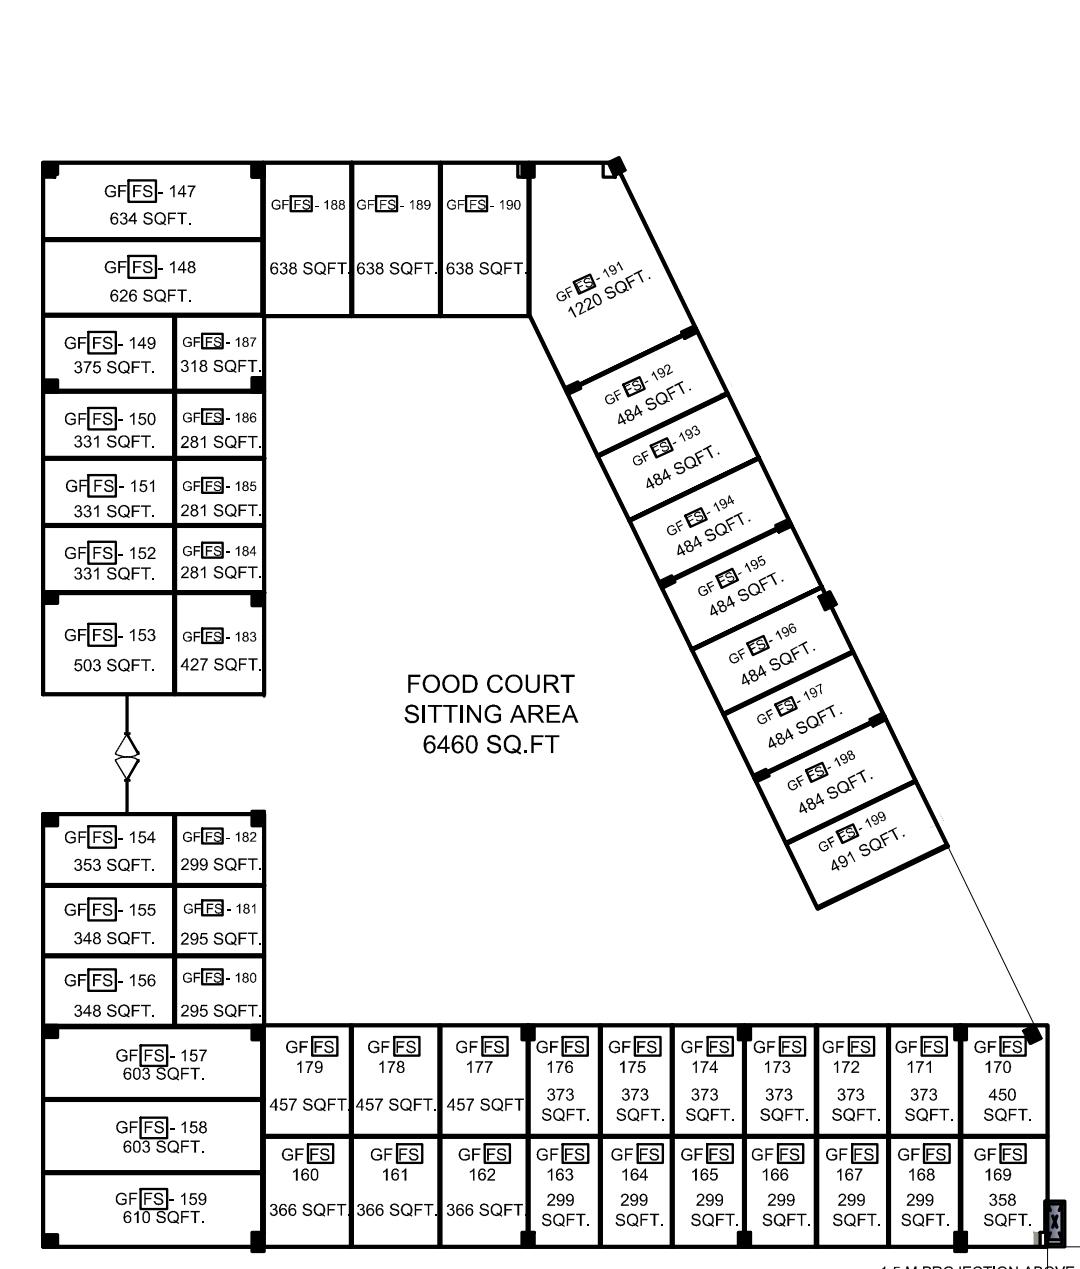 Food Court Layout